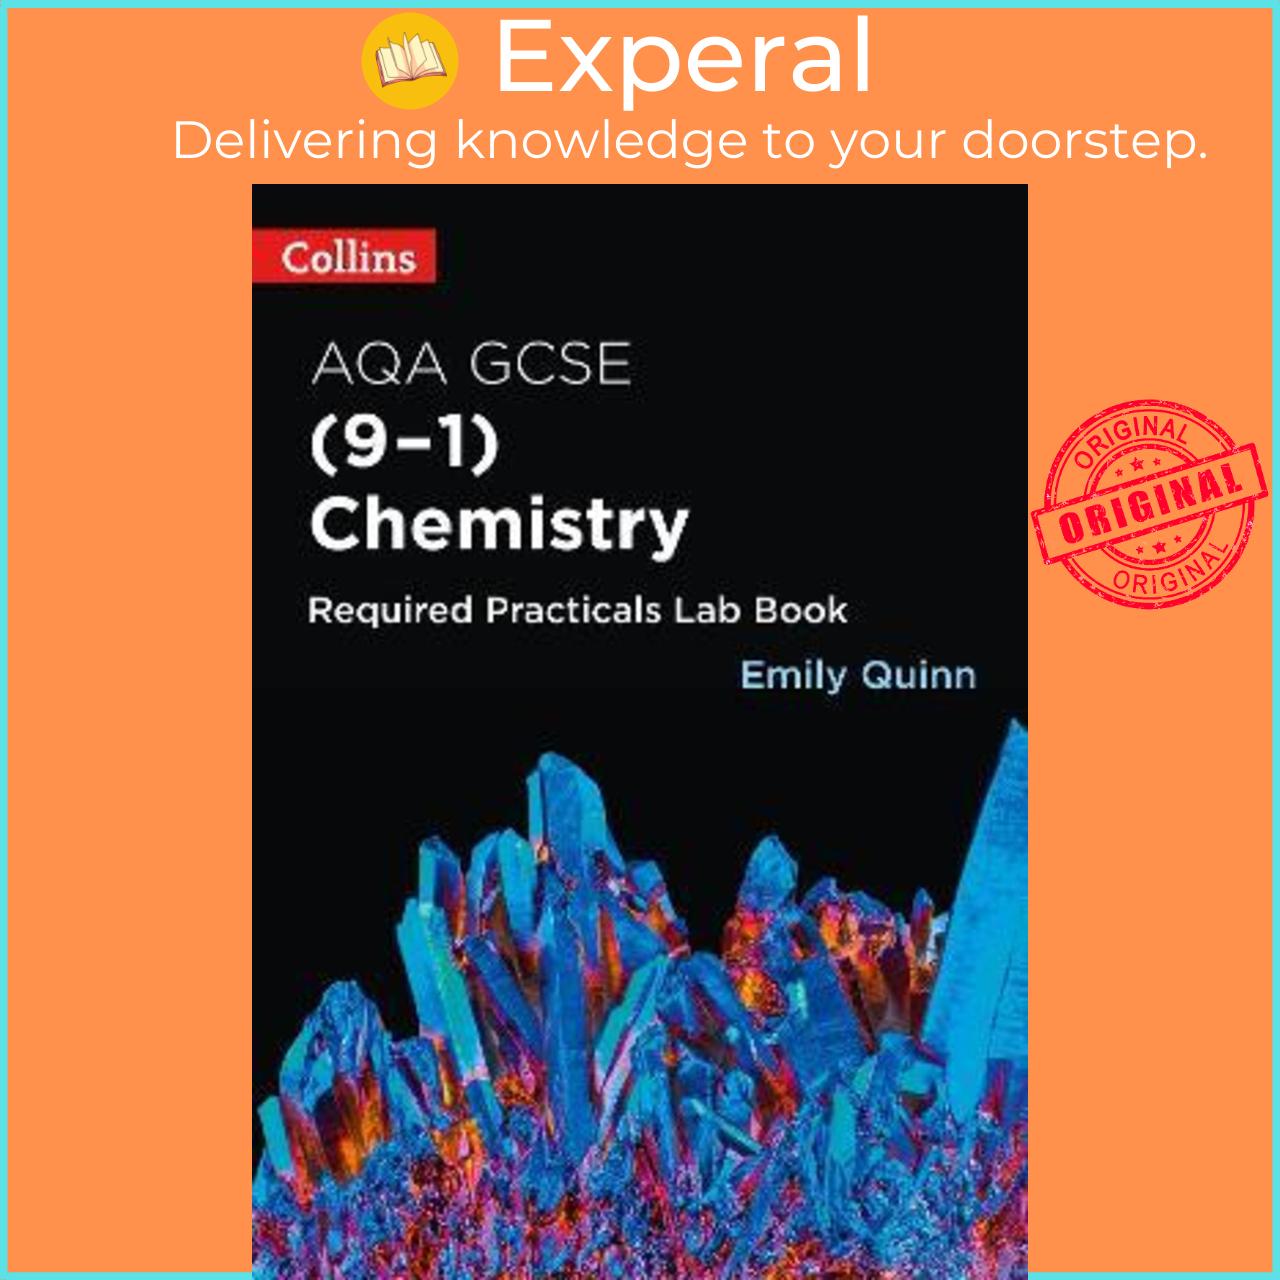 Hình ảnh Sách - AQA GCSE Chemistry (9-1) Required Practicals Lab Book by Emily Quinn (UK edition, paperback)